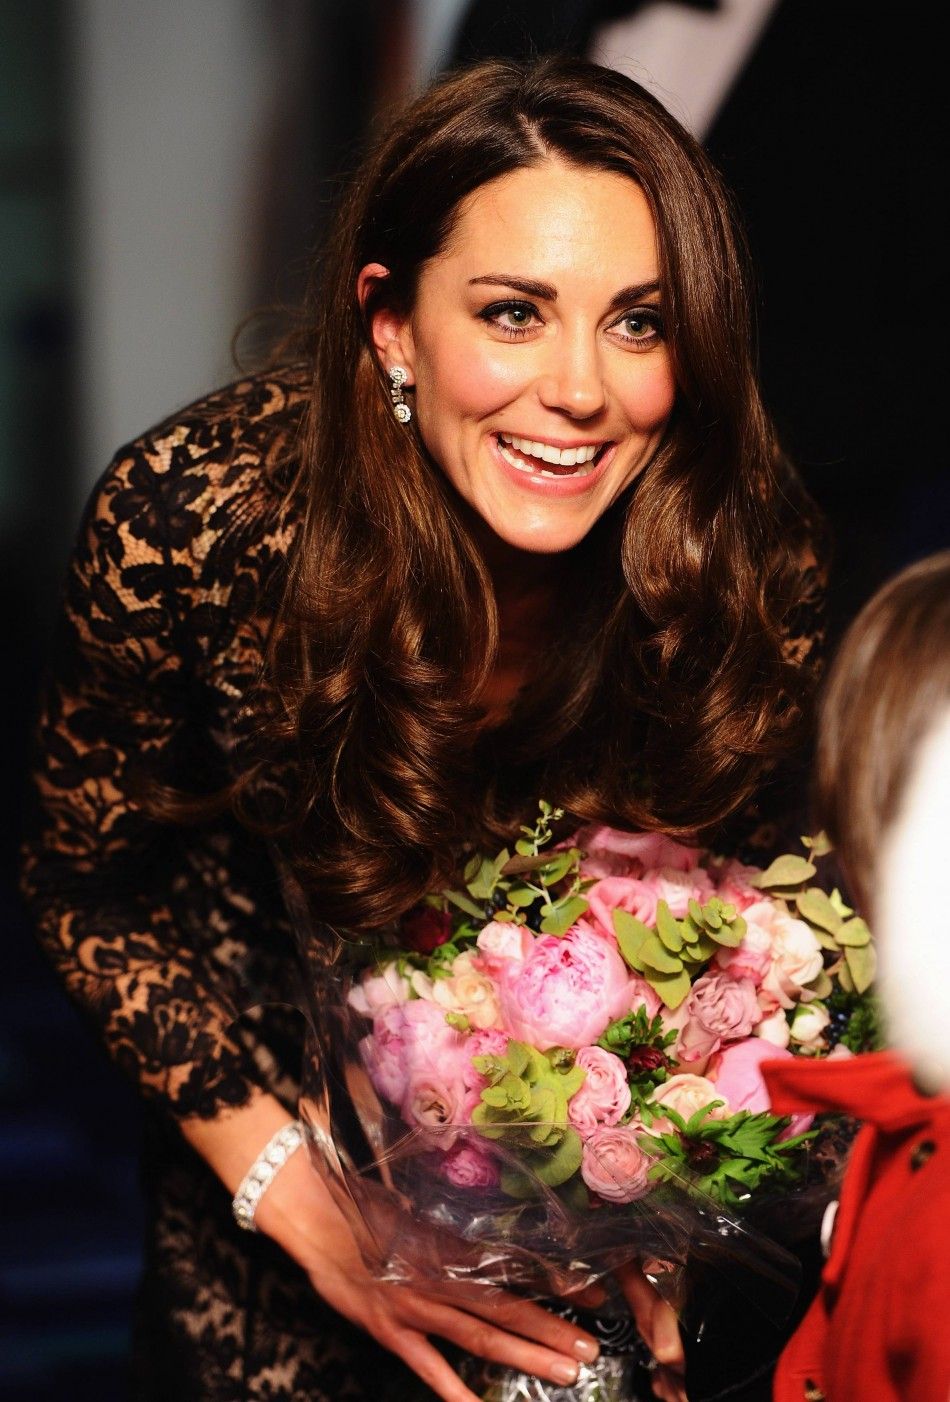 Catherine, Duchess of Cambridge attends the UK premiere of War Horse on the eve of her 30th birthday, at the Odeon Leicester Square cinema in London